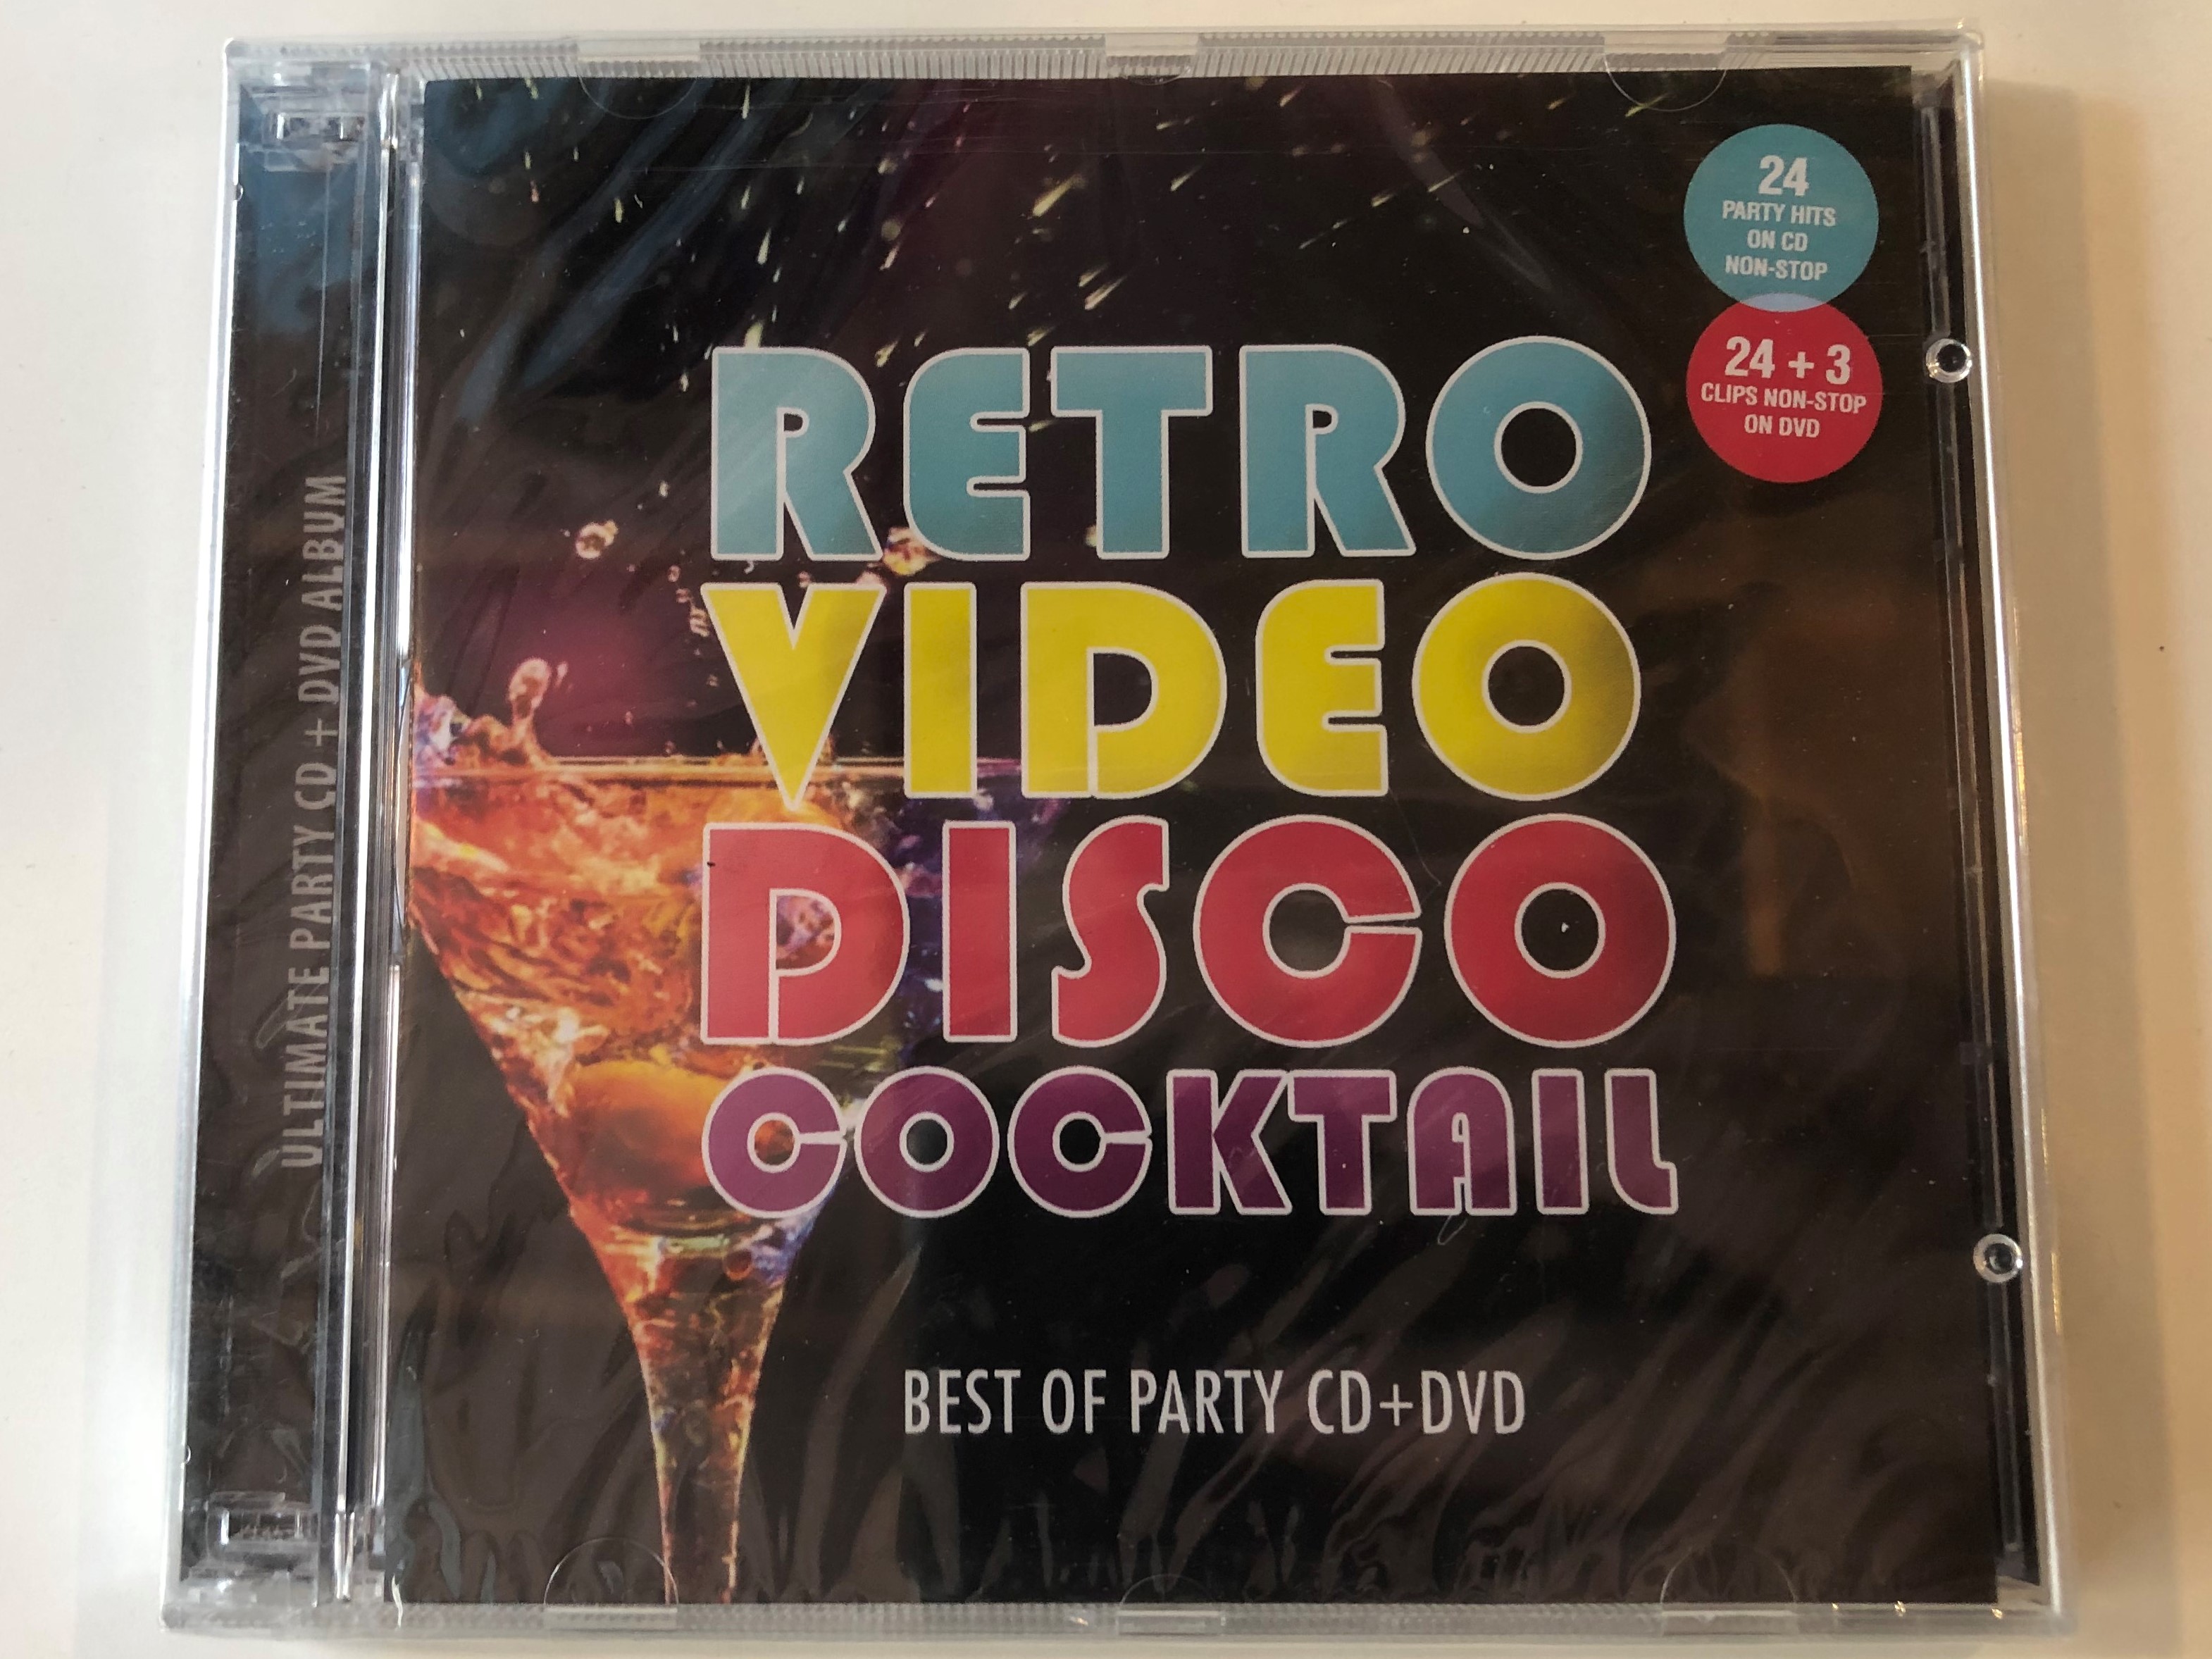 retro-video-disco-cocktail-best-of-party-cd-dvd-cocktail-records-audio-cd-dvd-psp301-1-.jpg